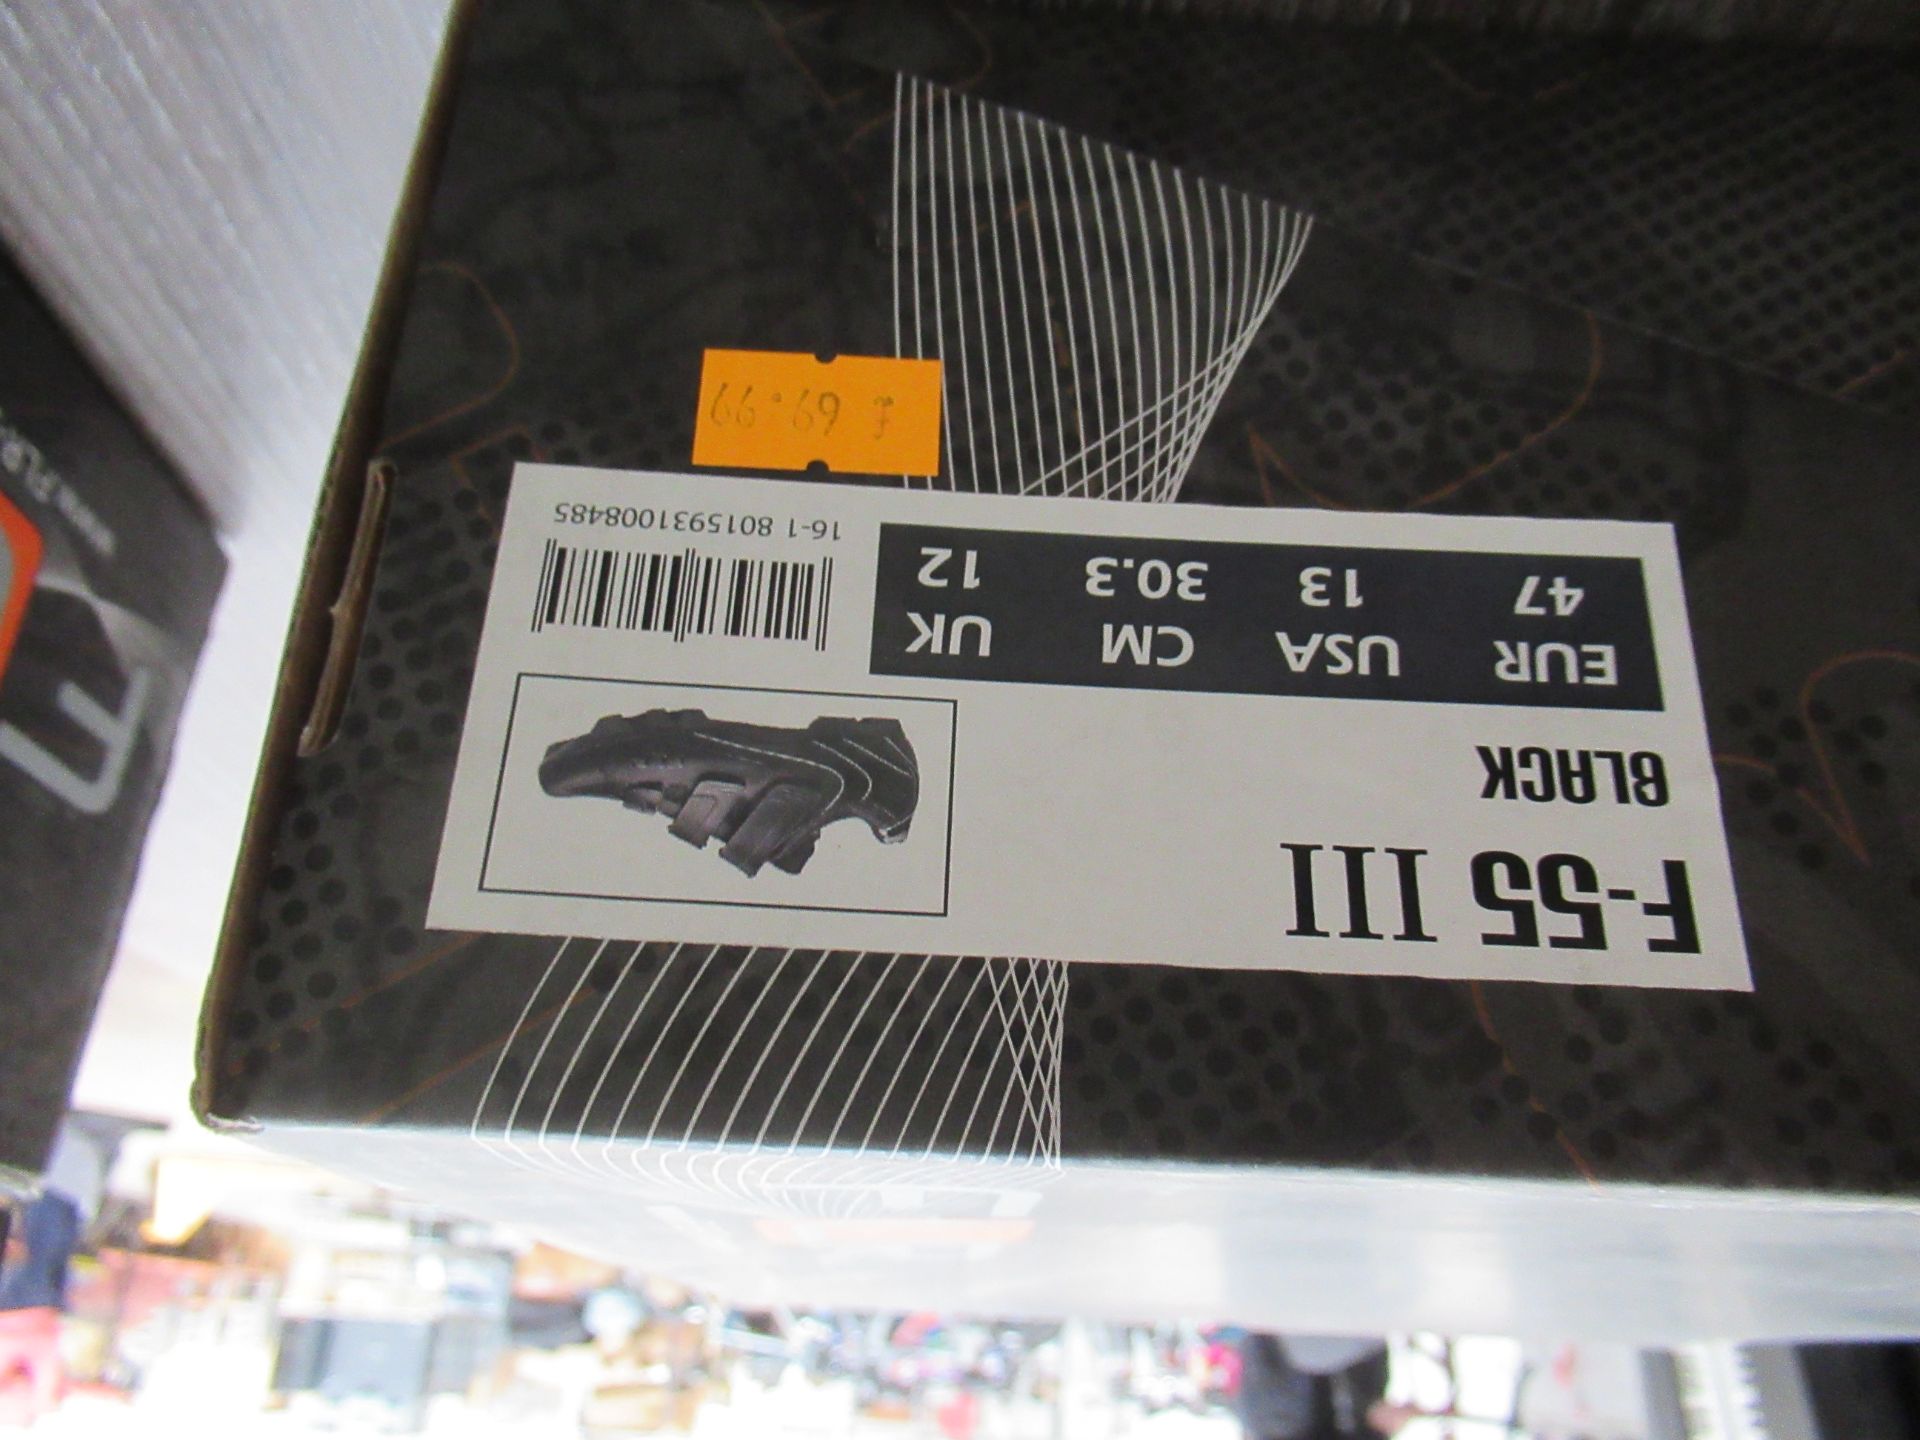 3 x Pairs of FLR cycling shoes - 1 x Bushmaster boxed EU size 41 (RRP£79.99); 1 x F-11 boxed EU size - Image 8 of 10